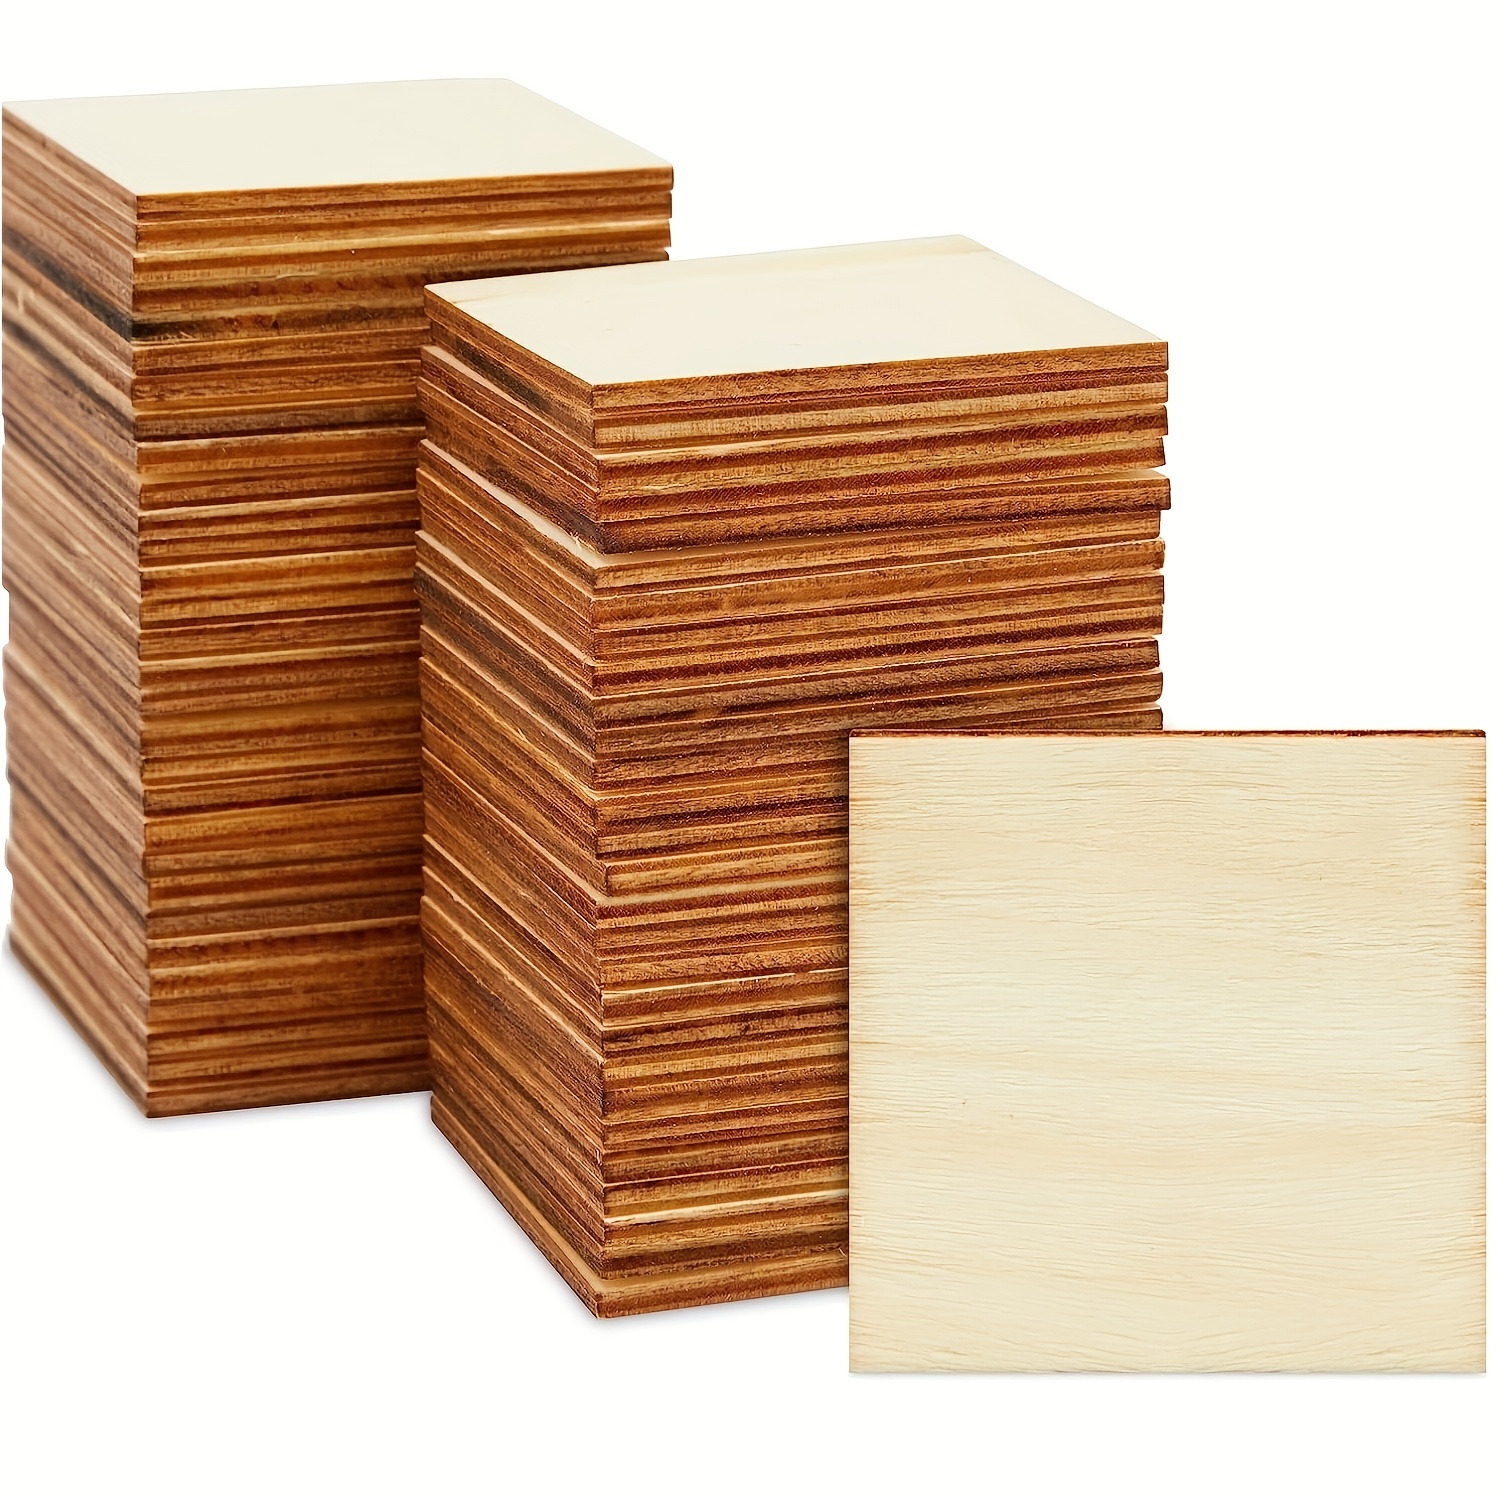 20pcs Unfinished Wood Pieces Wood Board Wooden Squares Cutout Tiles Natural